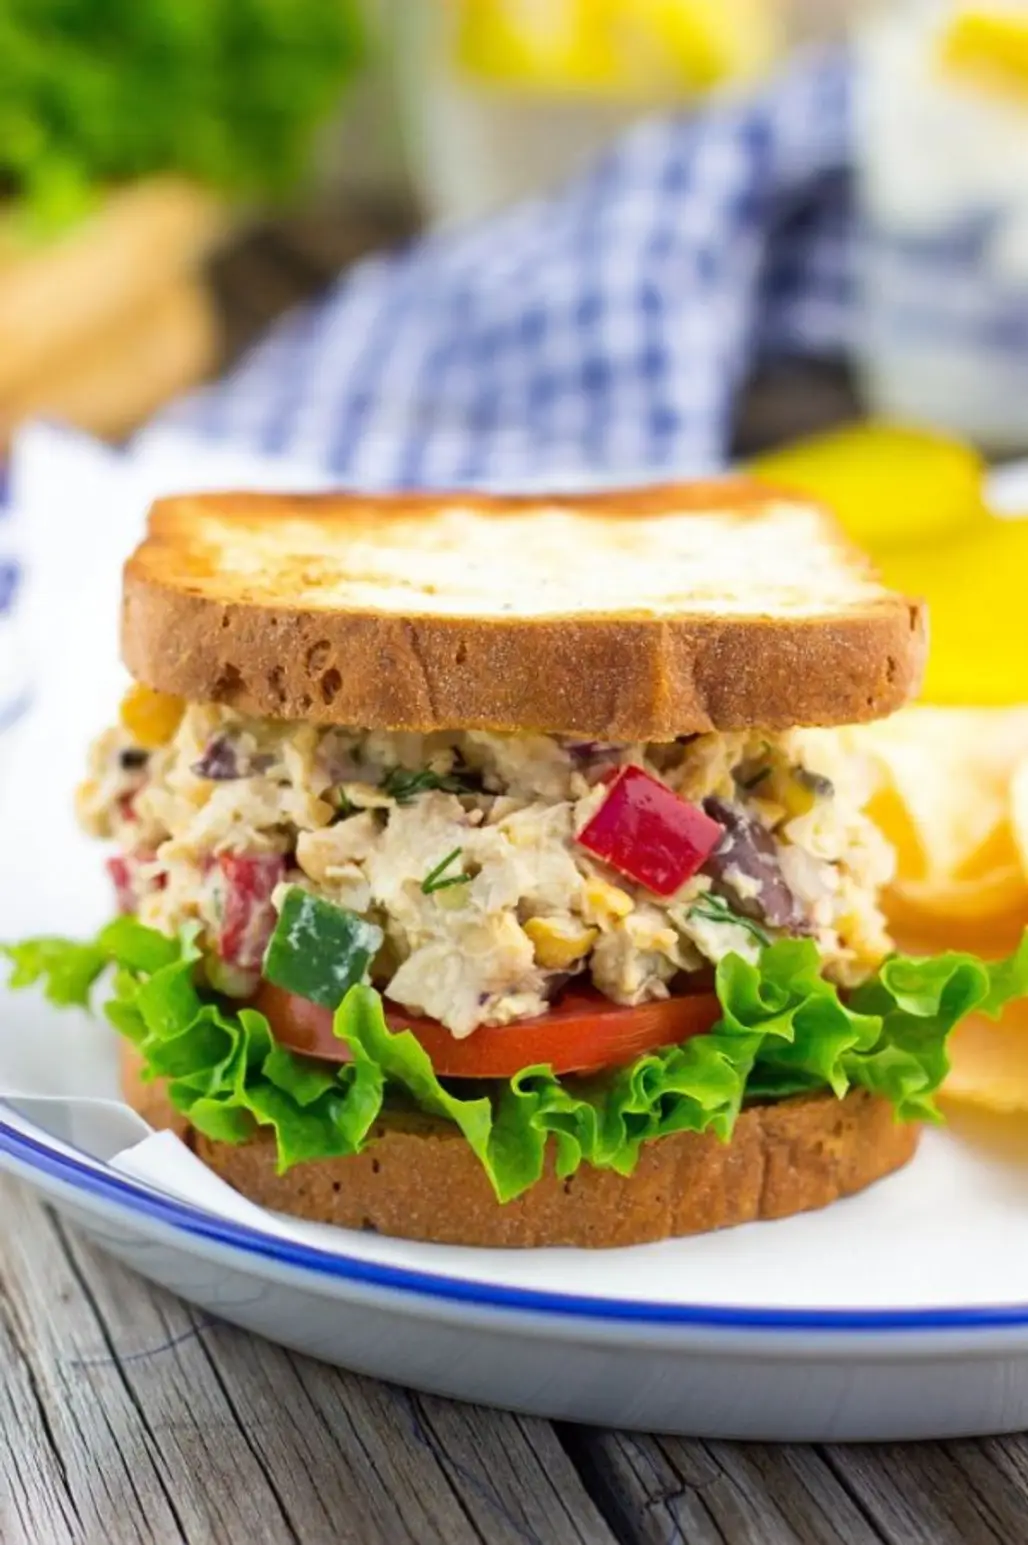 You'll Feel so Good Eating This Greek Chickpea Salad Sandwich